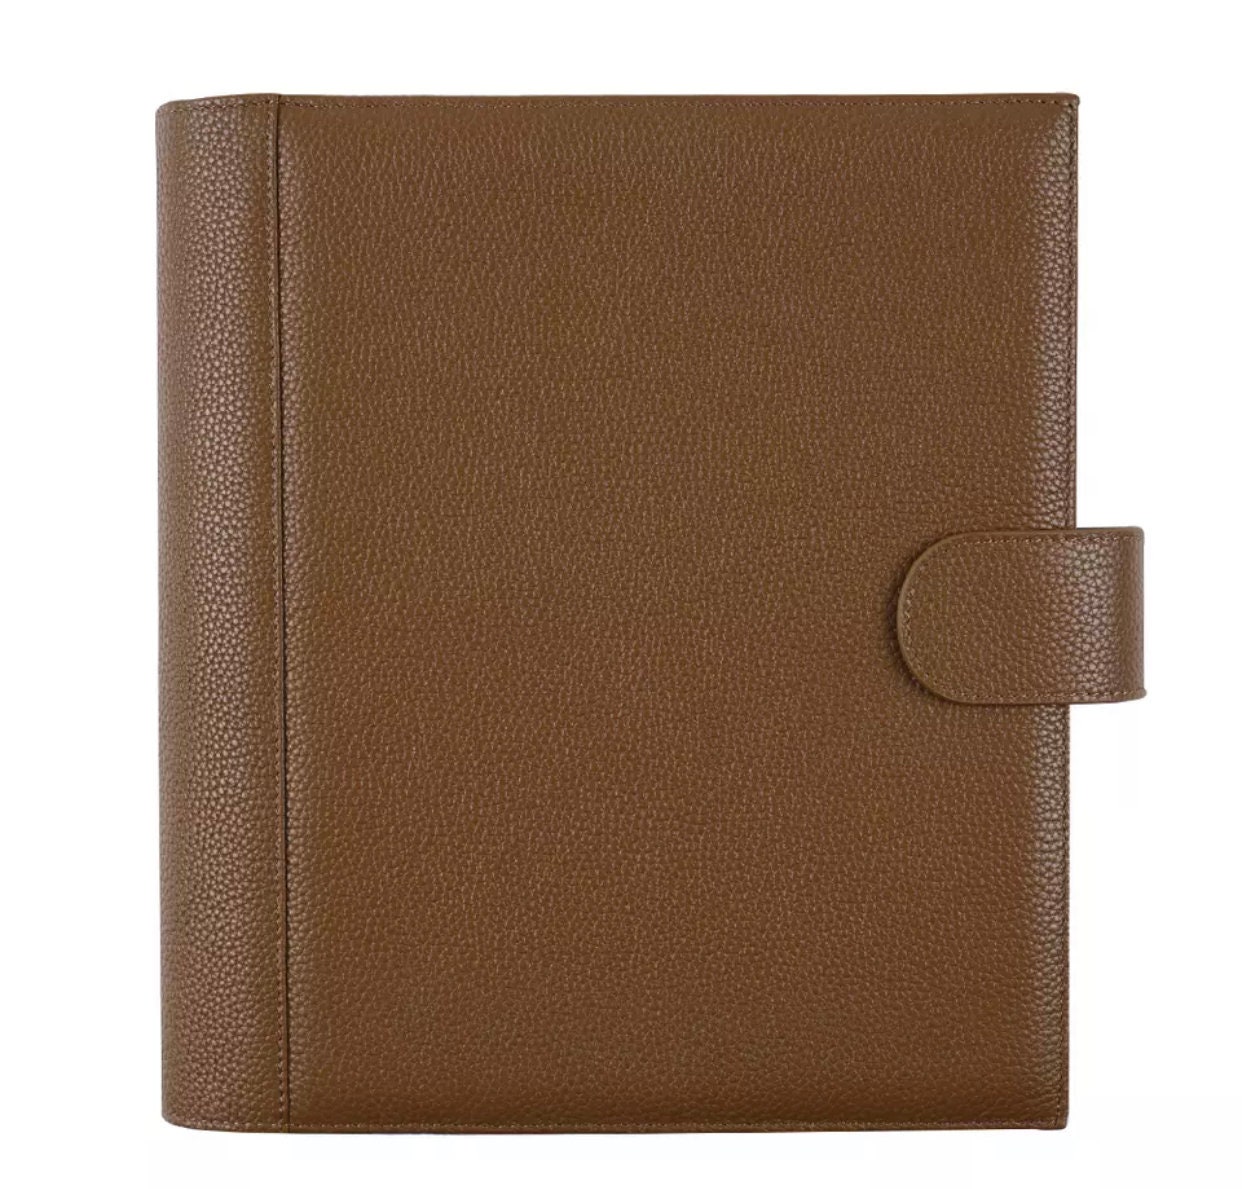  Genuine Leather Planner Cover Handmade for A6 Journal Diary  Notebooks Agenda Organizer Flexible with Pen Loop Card Slots Zipper Pocket  and Back Pocket Full Grain Leather : Office Products